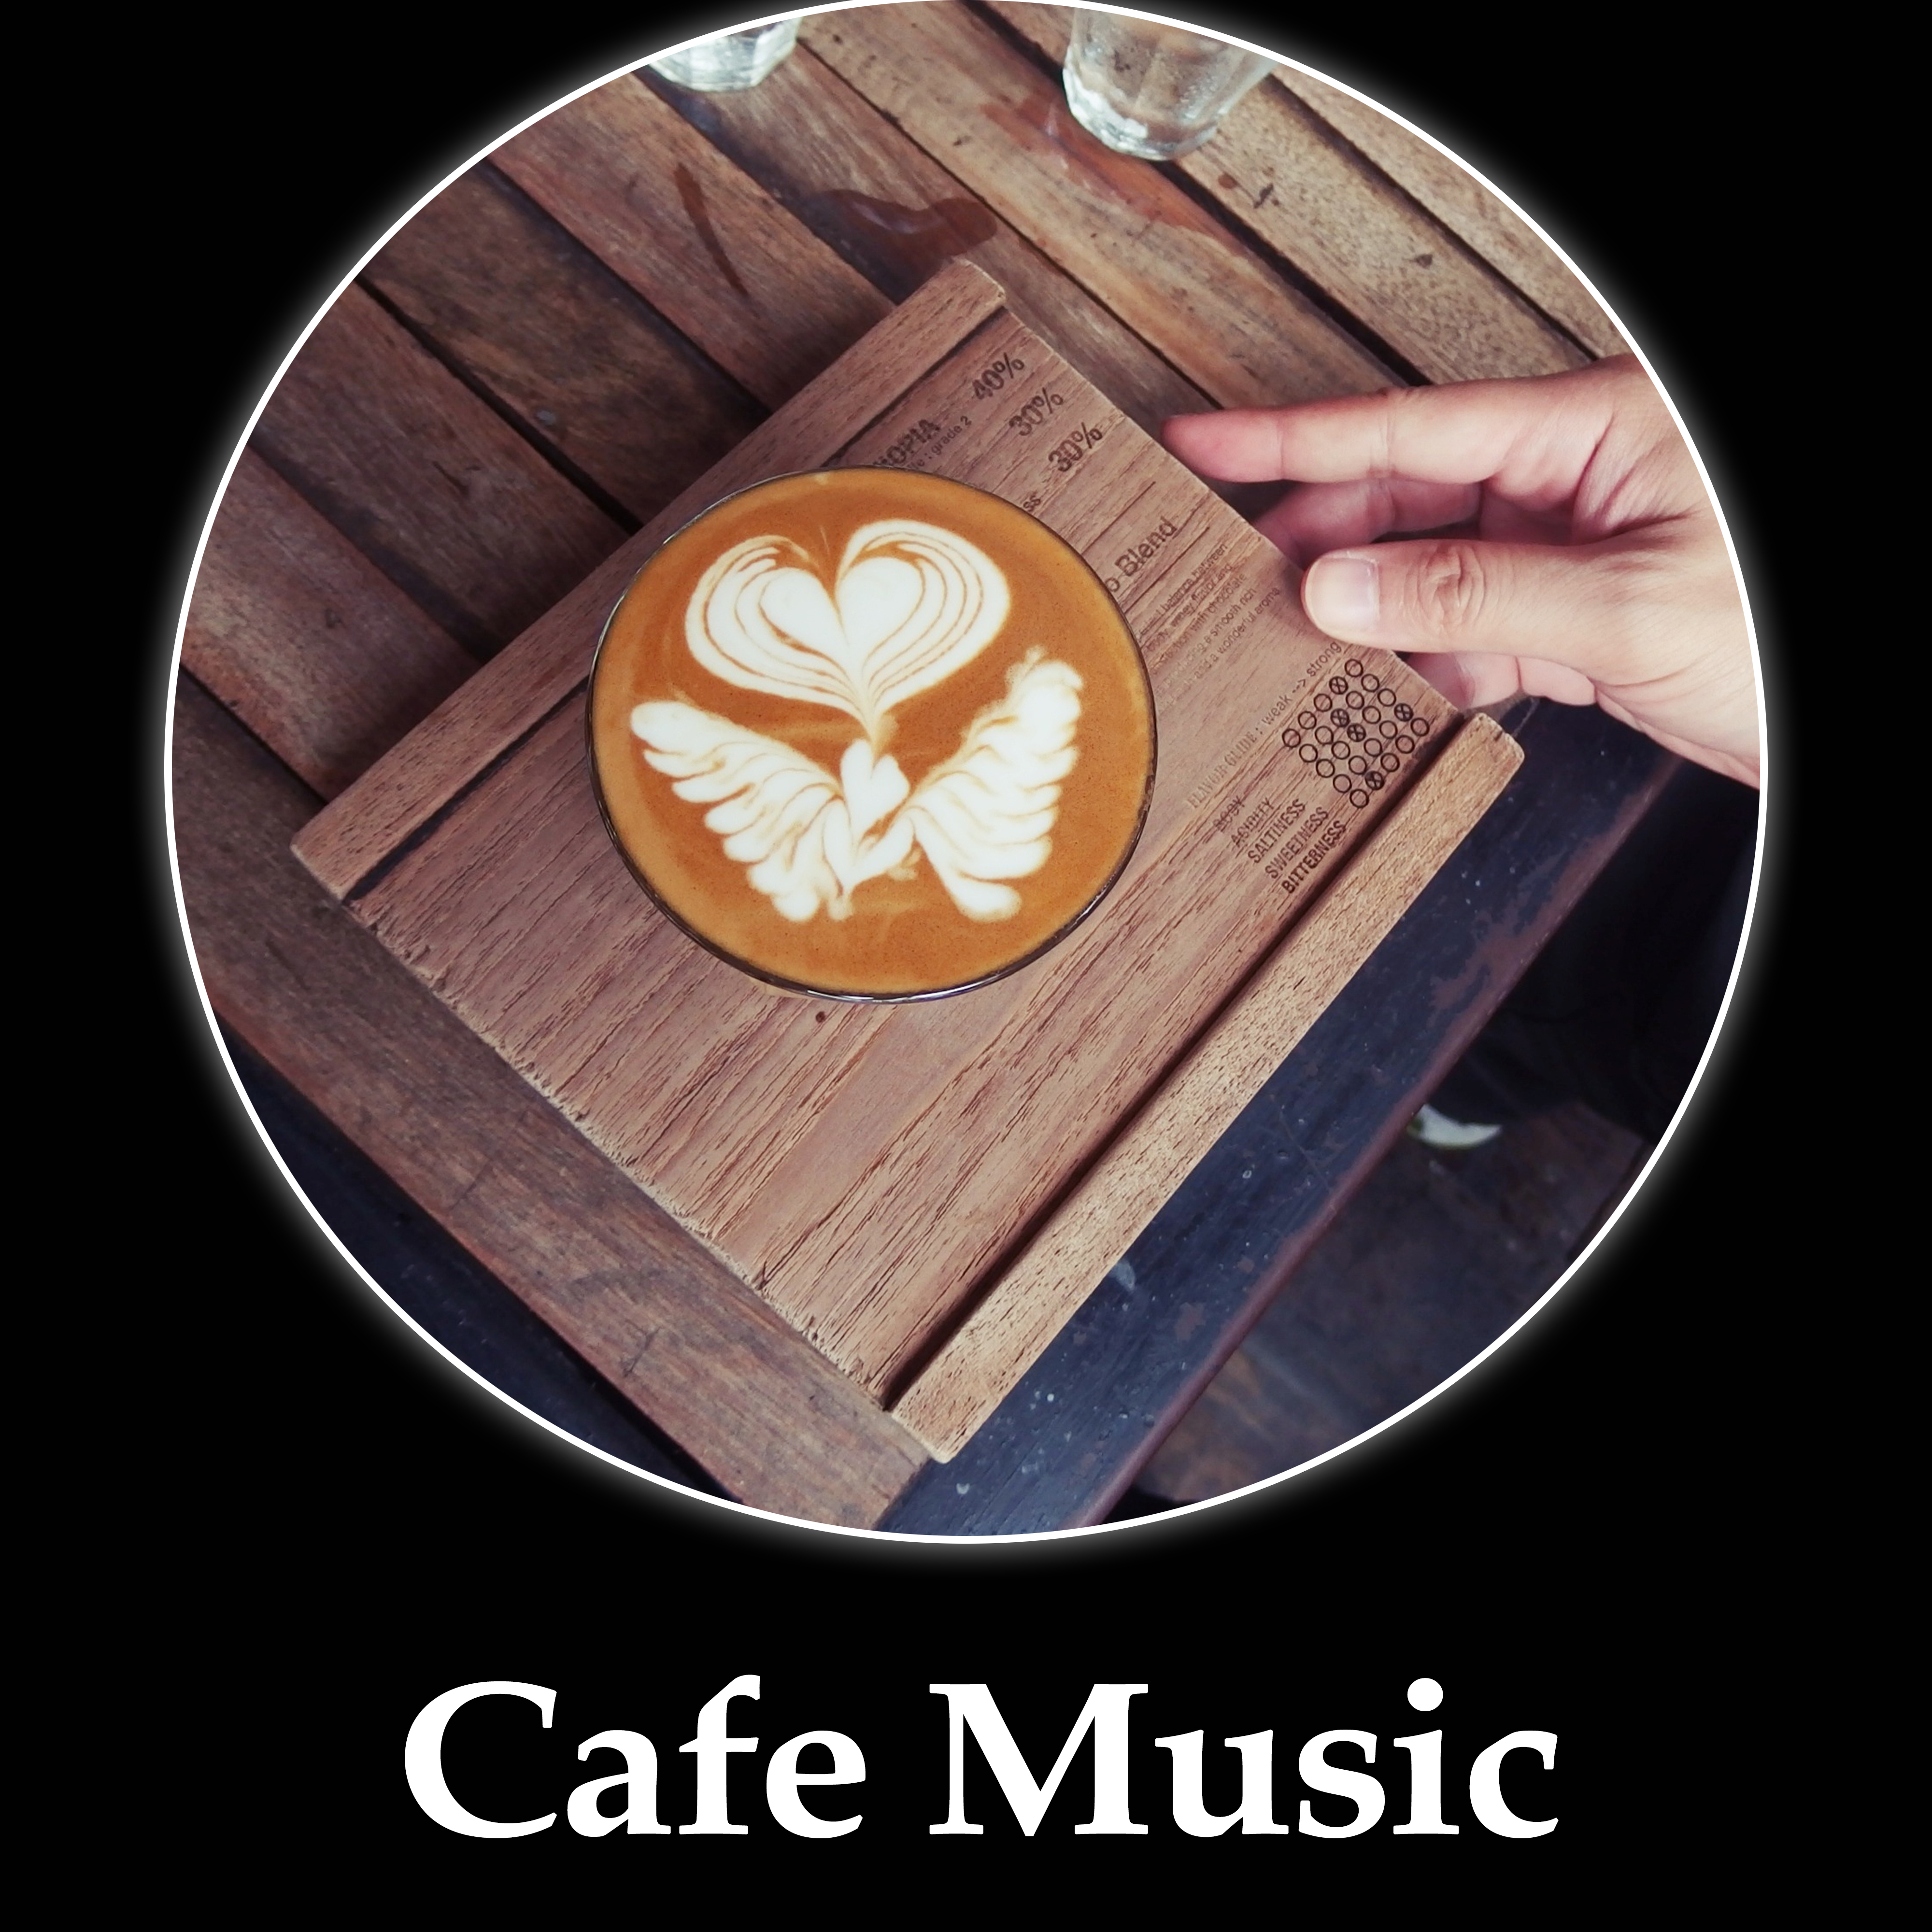 Cafe Music  Melow Sounds of Jazz for Restaurant  Cafe, Beautiful Jazz Sounds, Ambient Instrumental Piano, Easy Listening